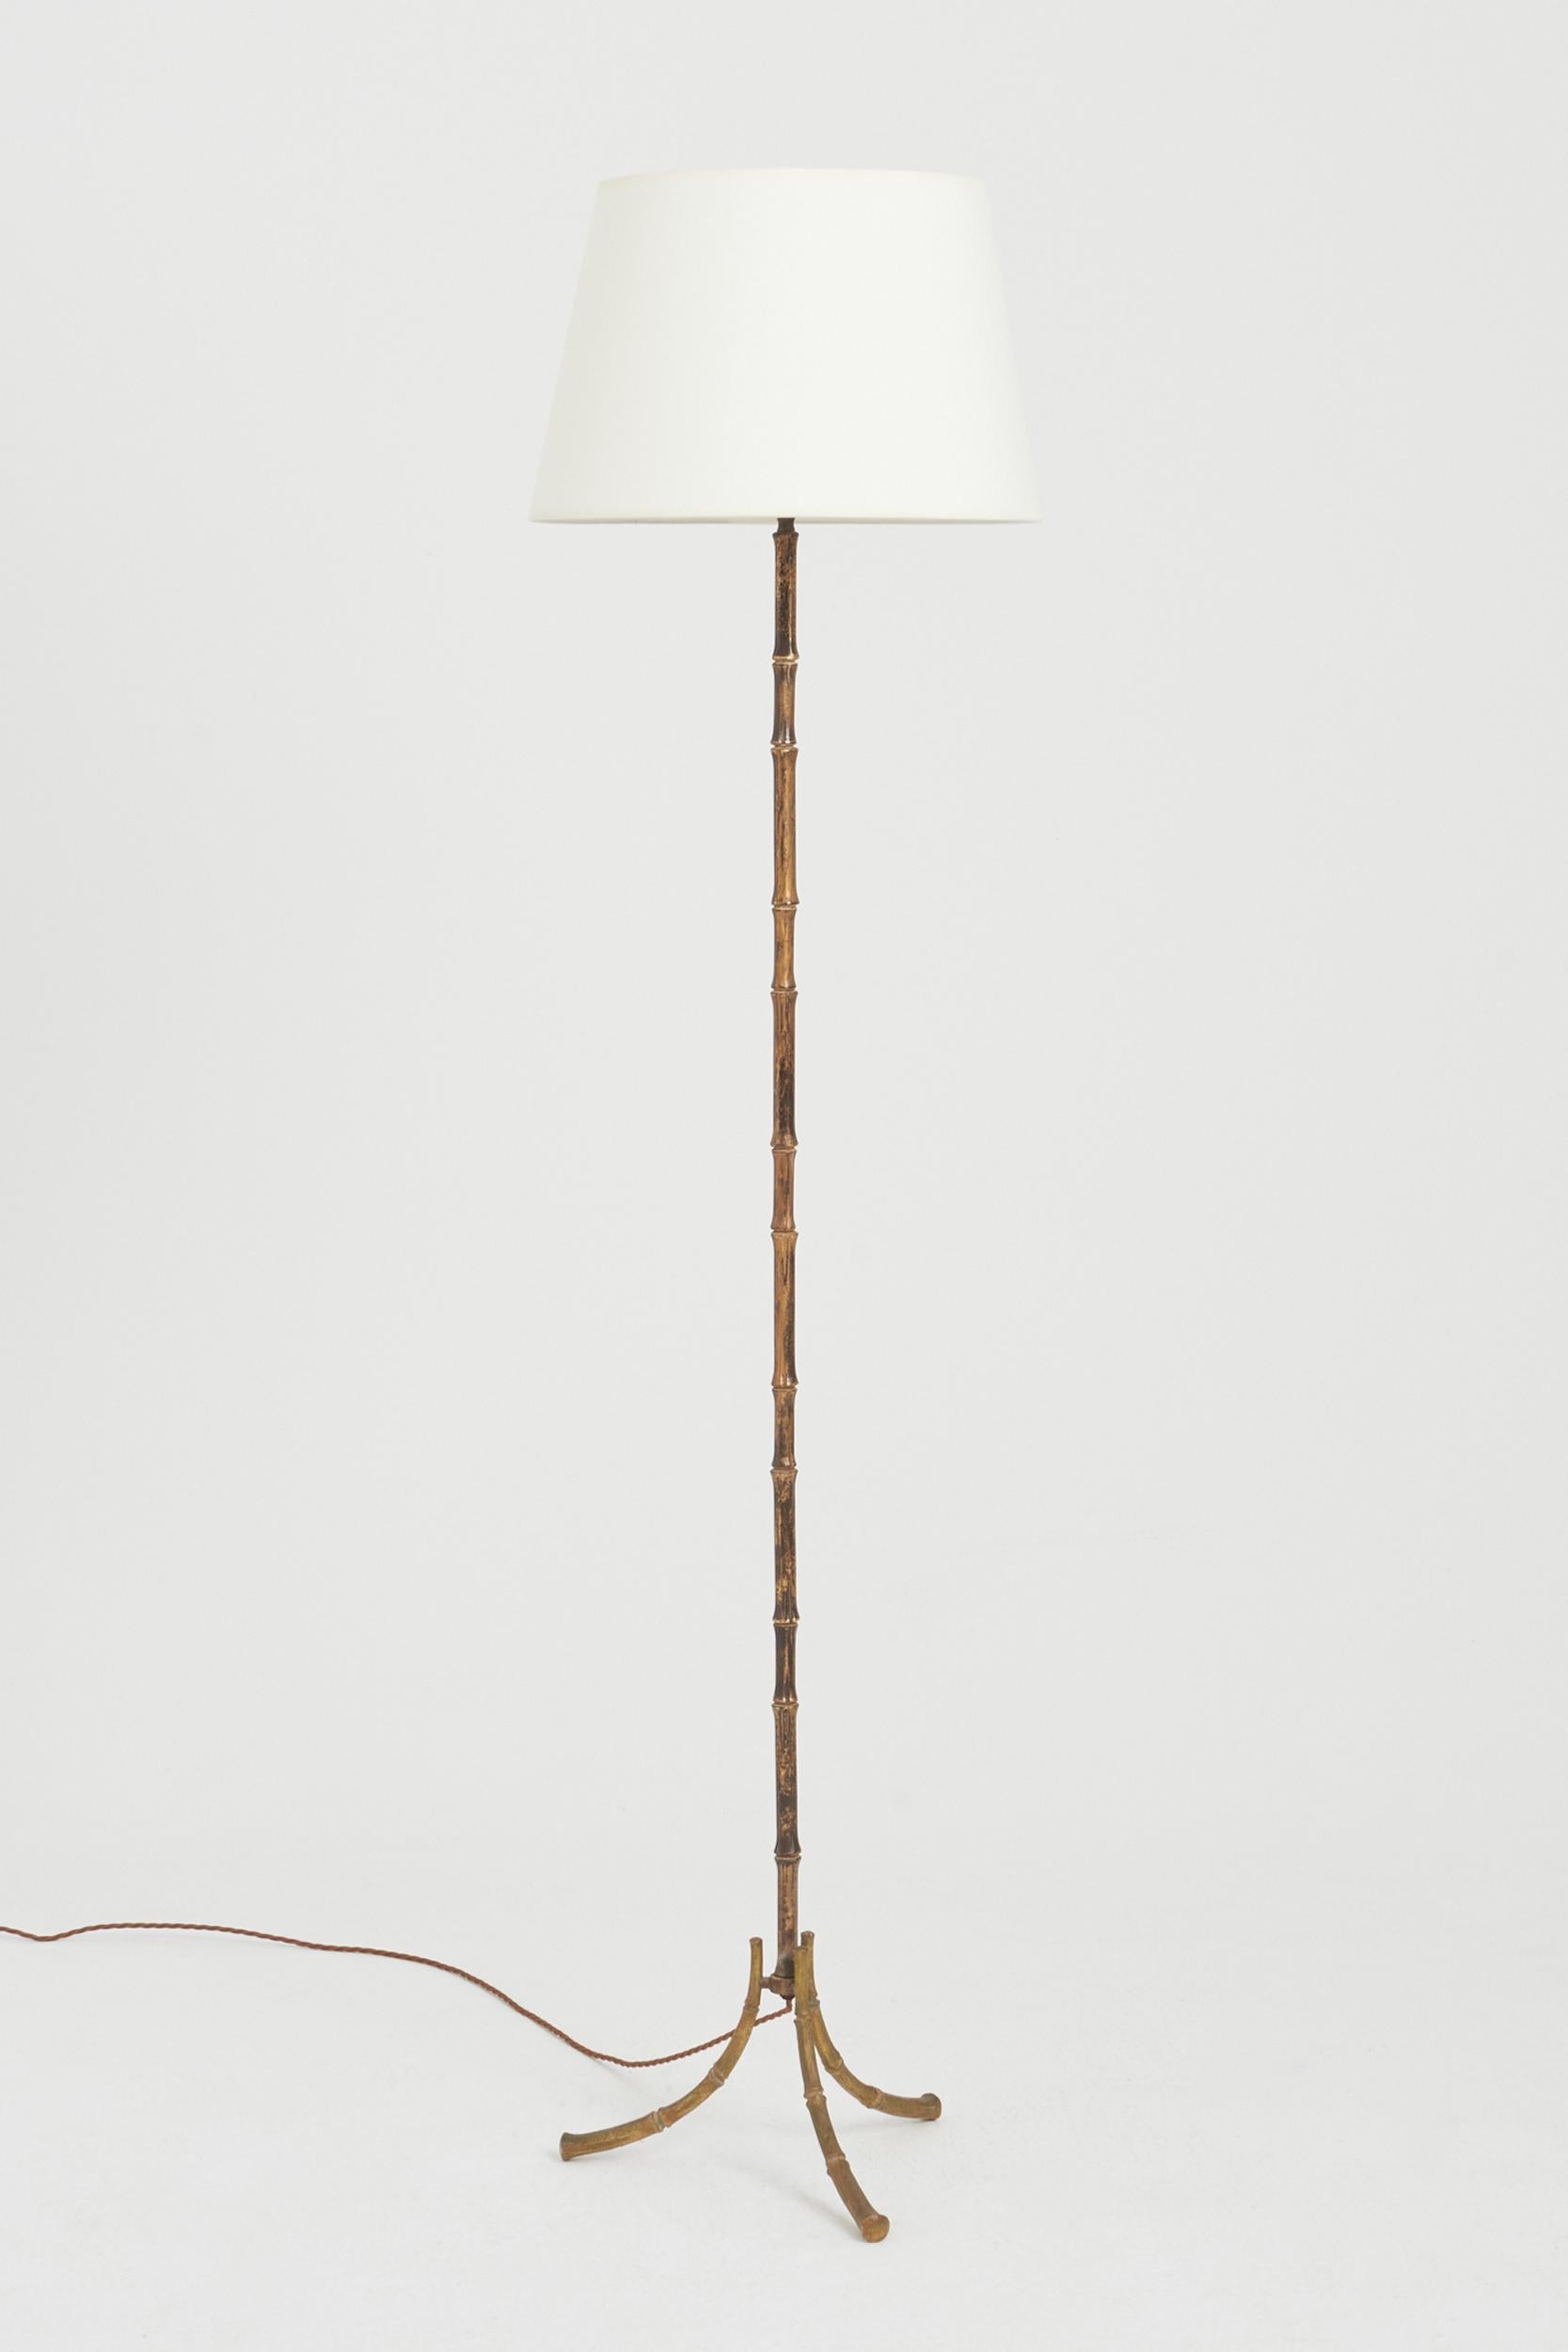 A brass stylised bamboo floor lamp.
France, 1970s
With the shade: 160 cm high by 41 cm diameter
Lamp base only: 142 cm high by 35 cm diameter.